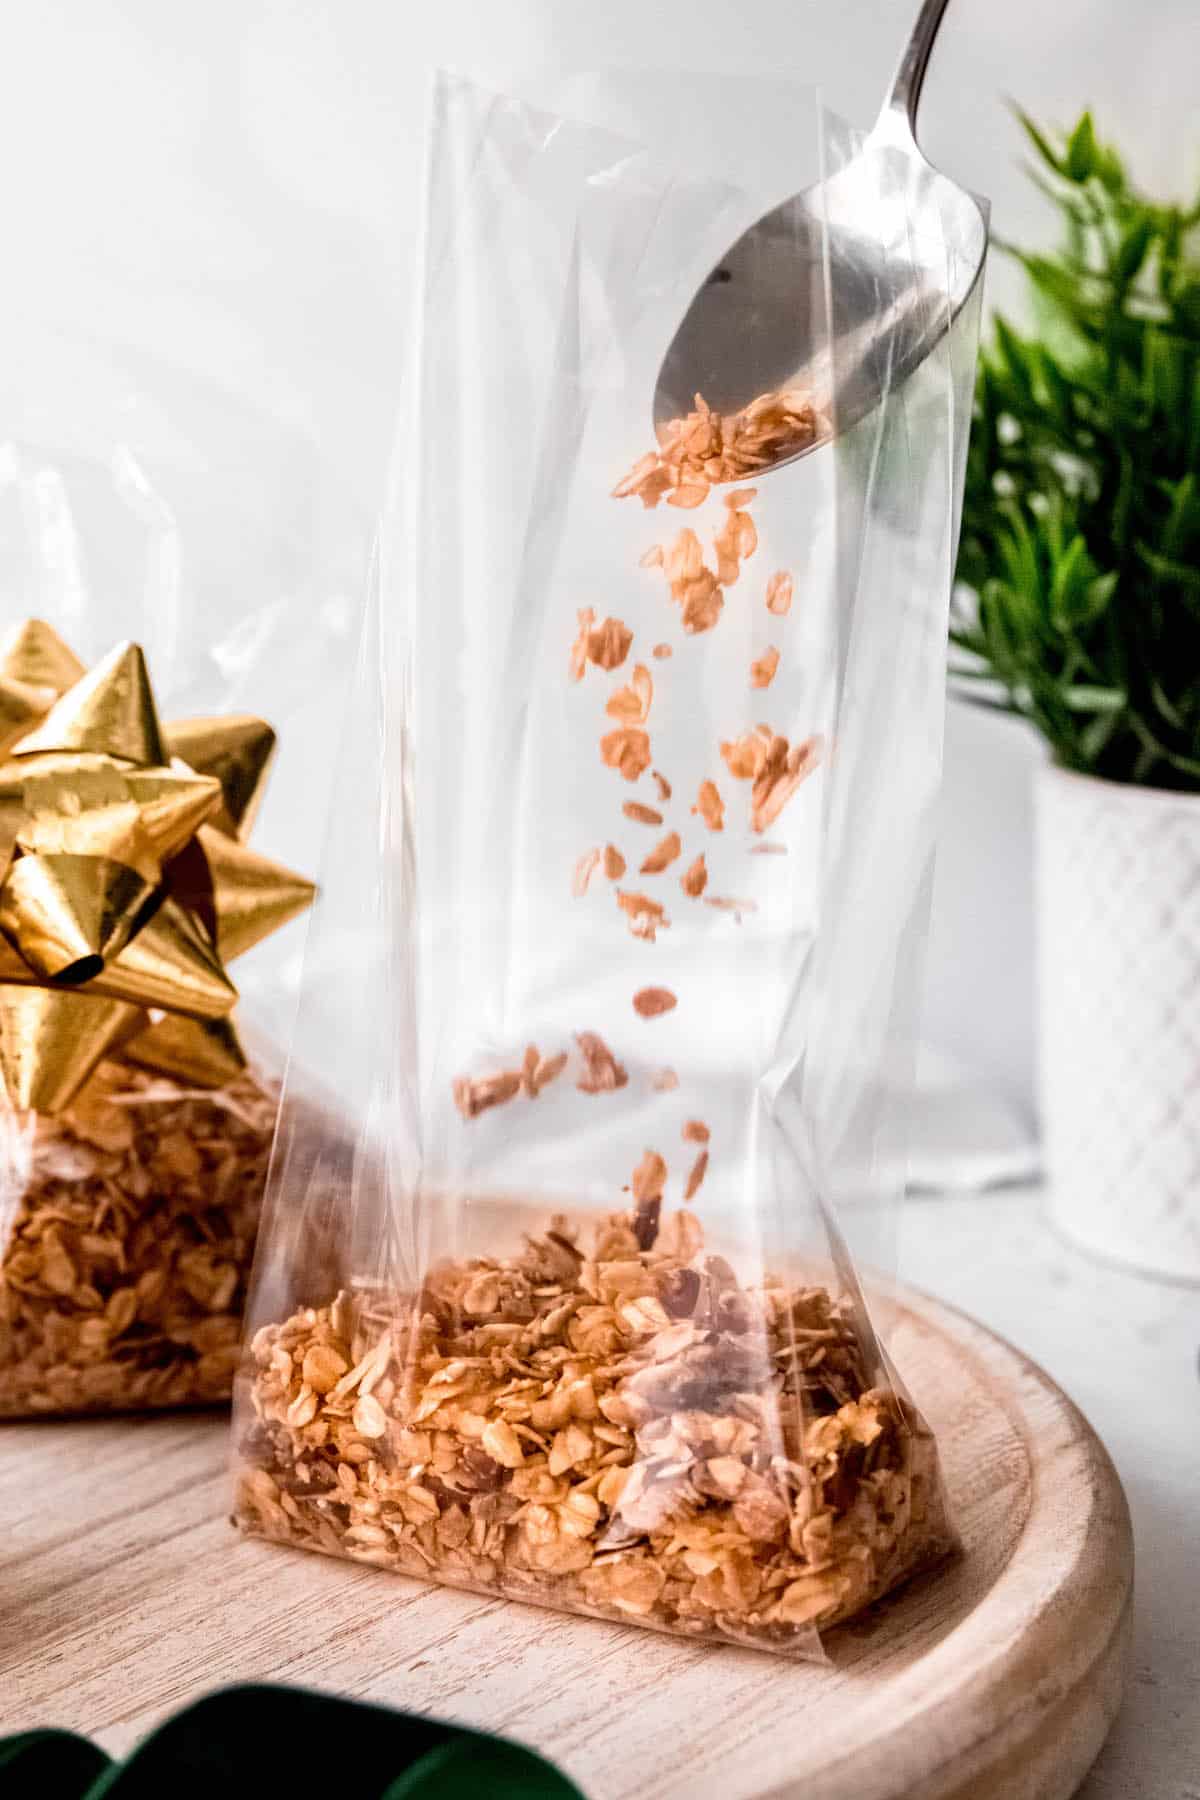 action shot of divvying up the bulk granola recipe into cellophane bags for gifting.